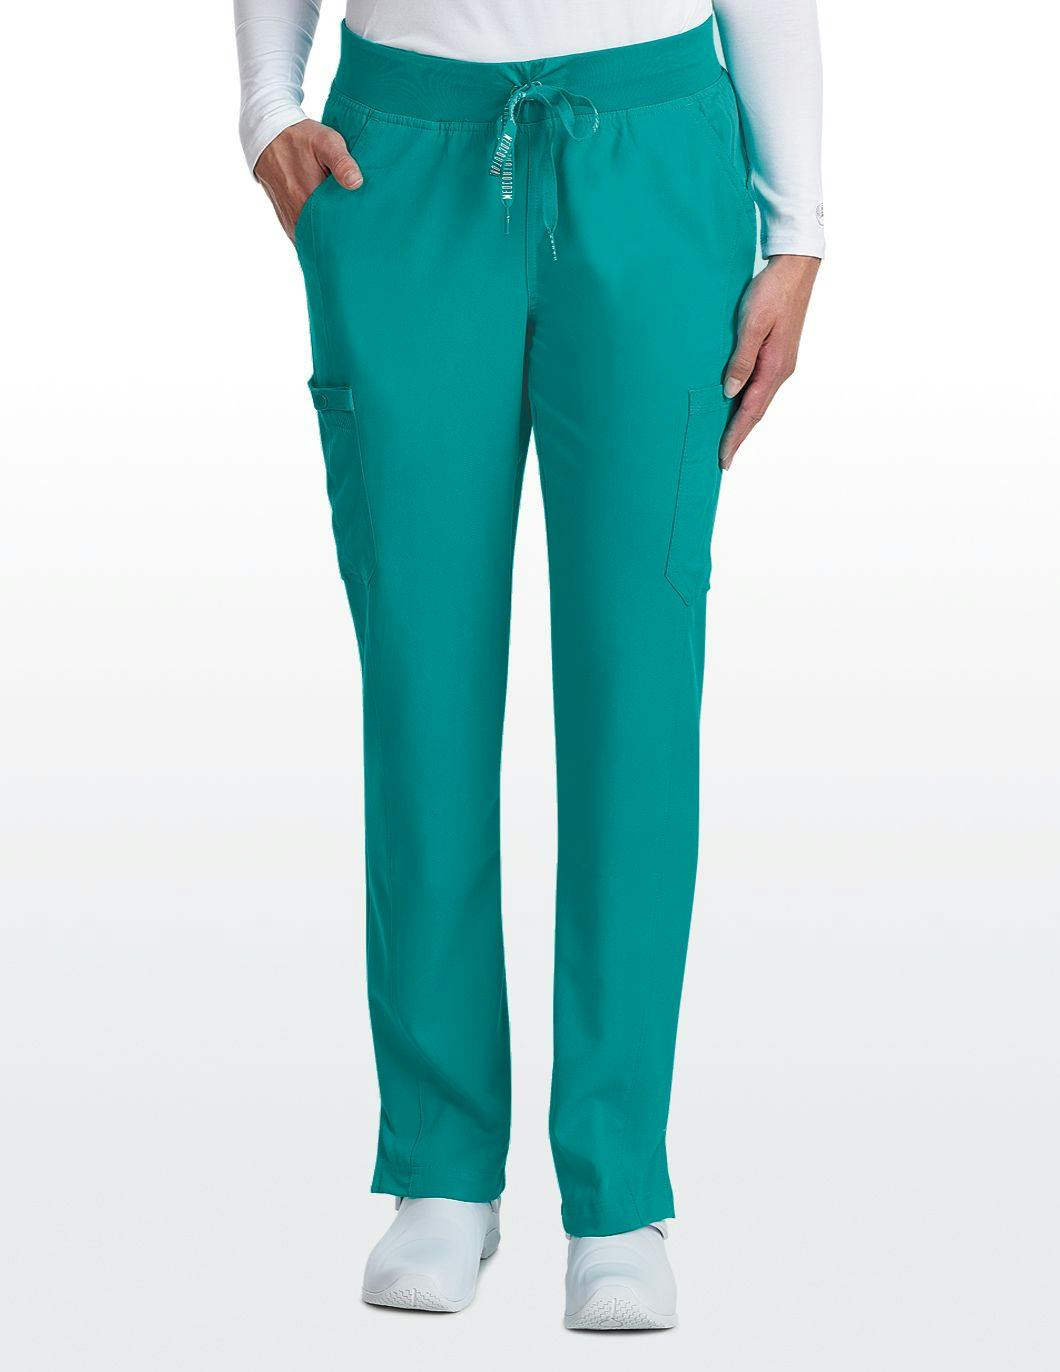 med-couture-touch-yoga-waist-pant-teal